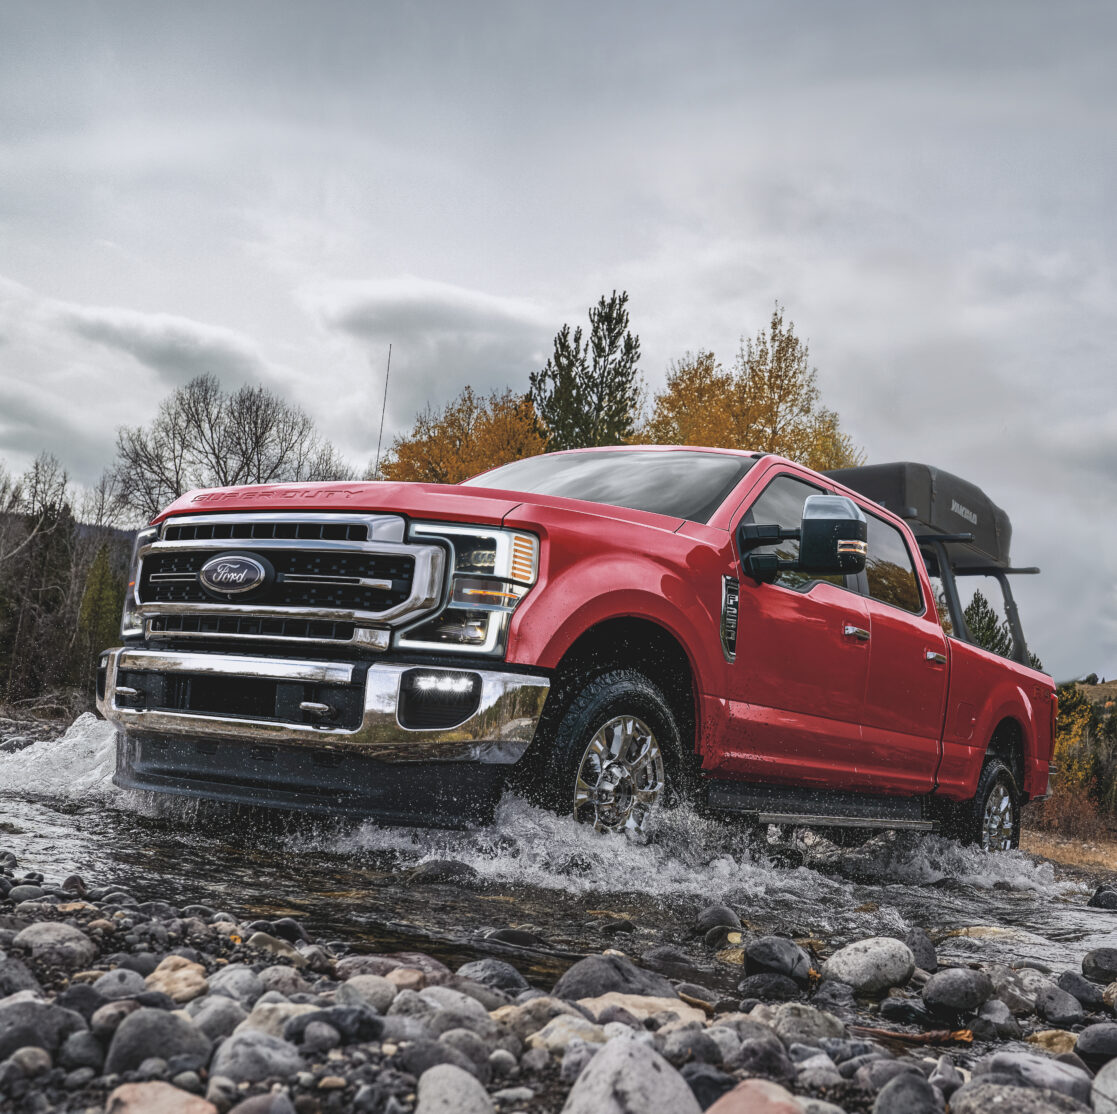 The 2021 Ford. F-250 as it drives through a rocky stream.